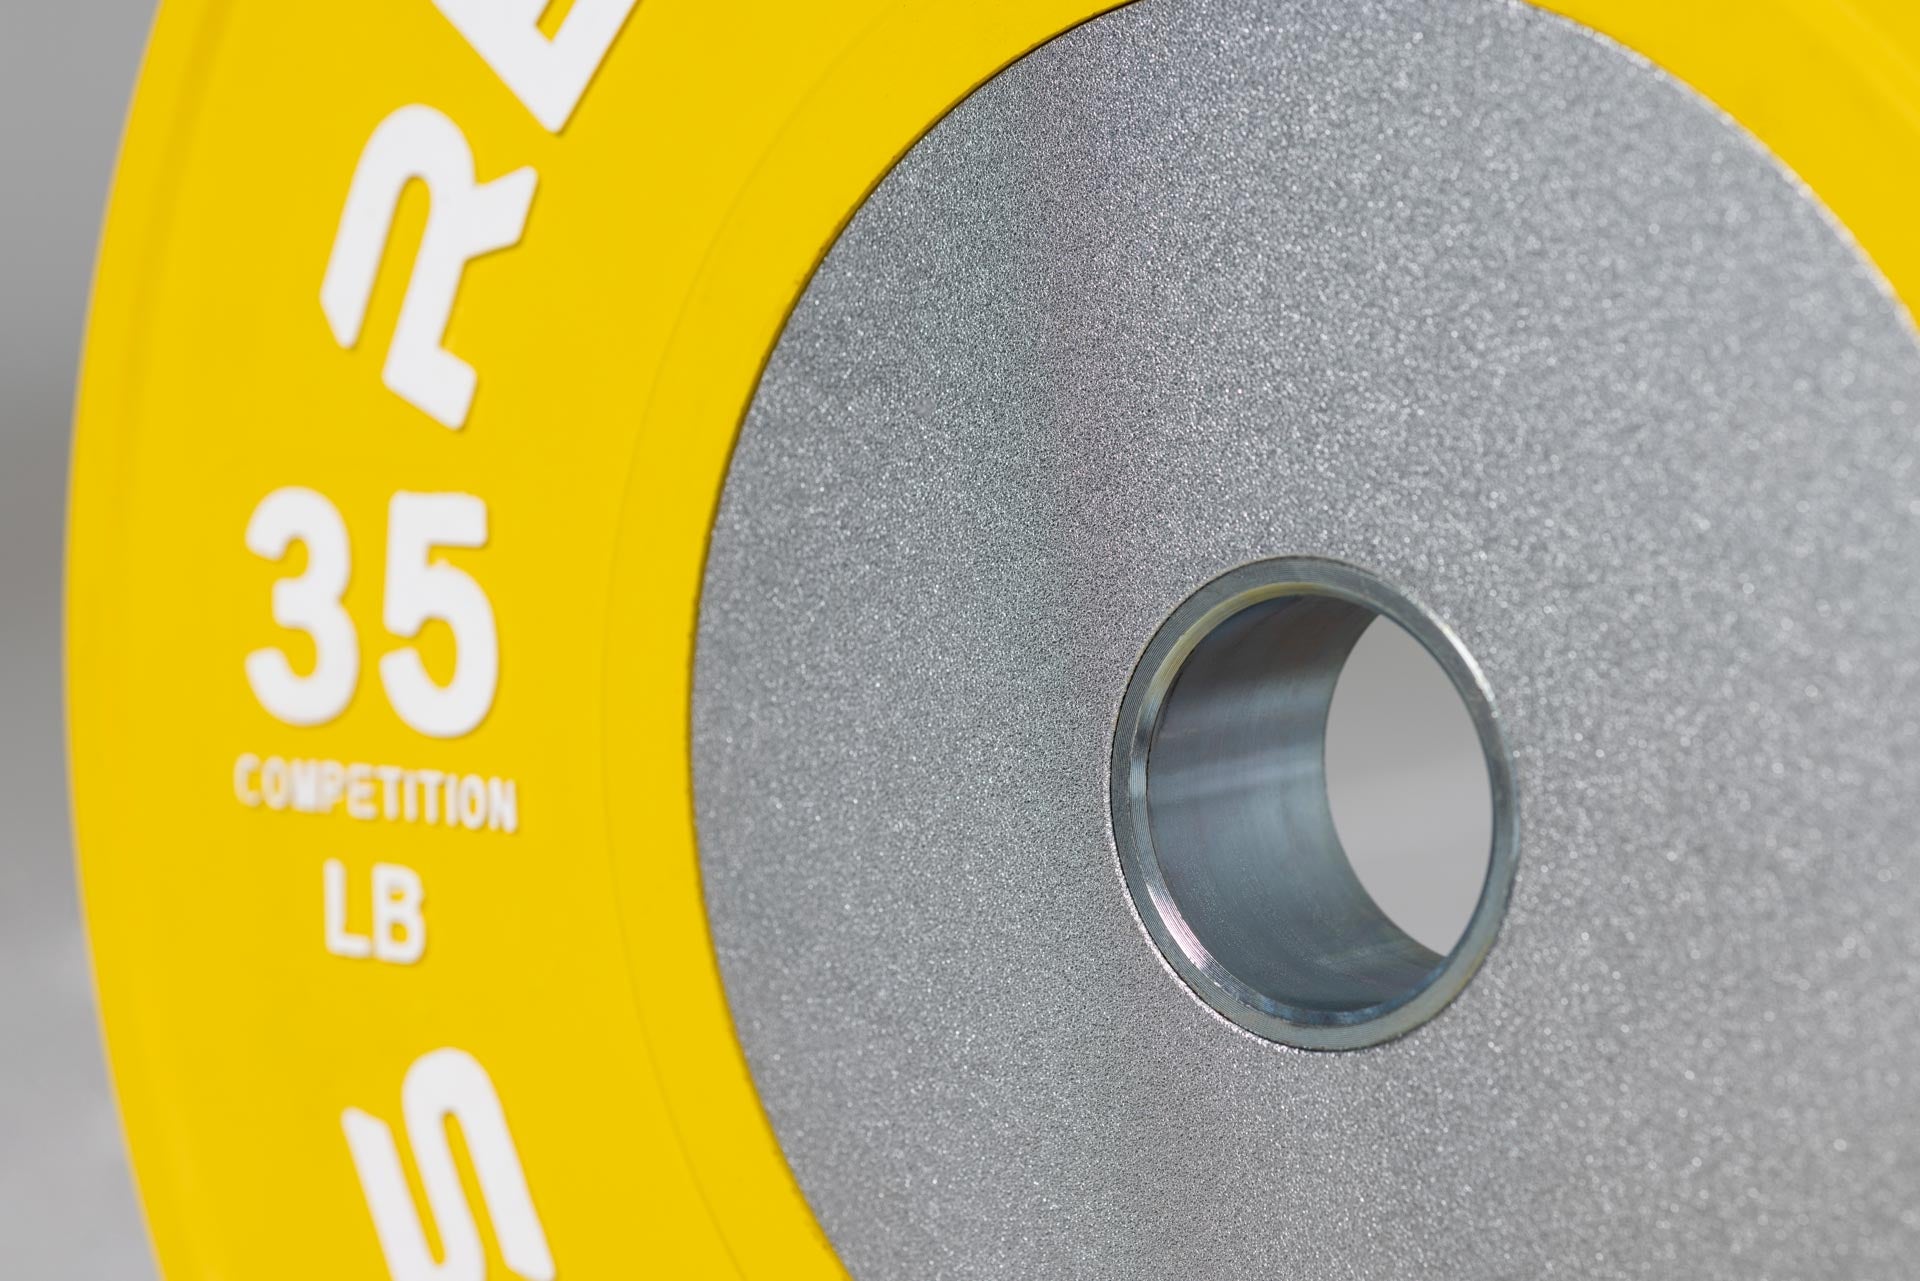 Close-up view of a yellow 35lb competition bumper plate showing zinc-coated steel disc insert and raised white weight marking lettering.